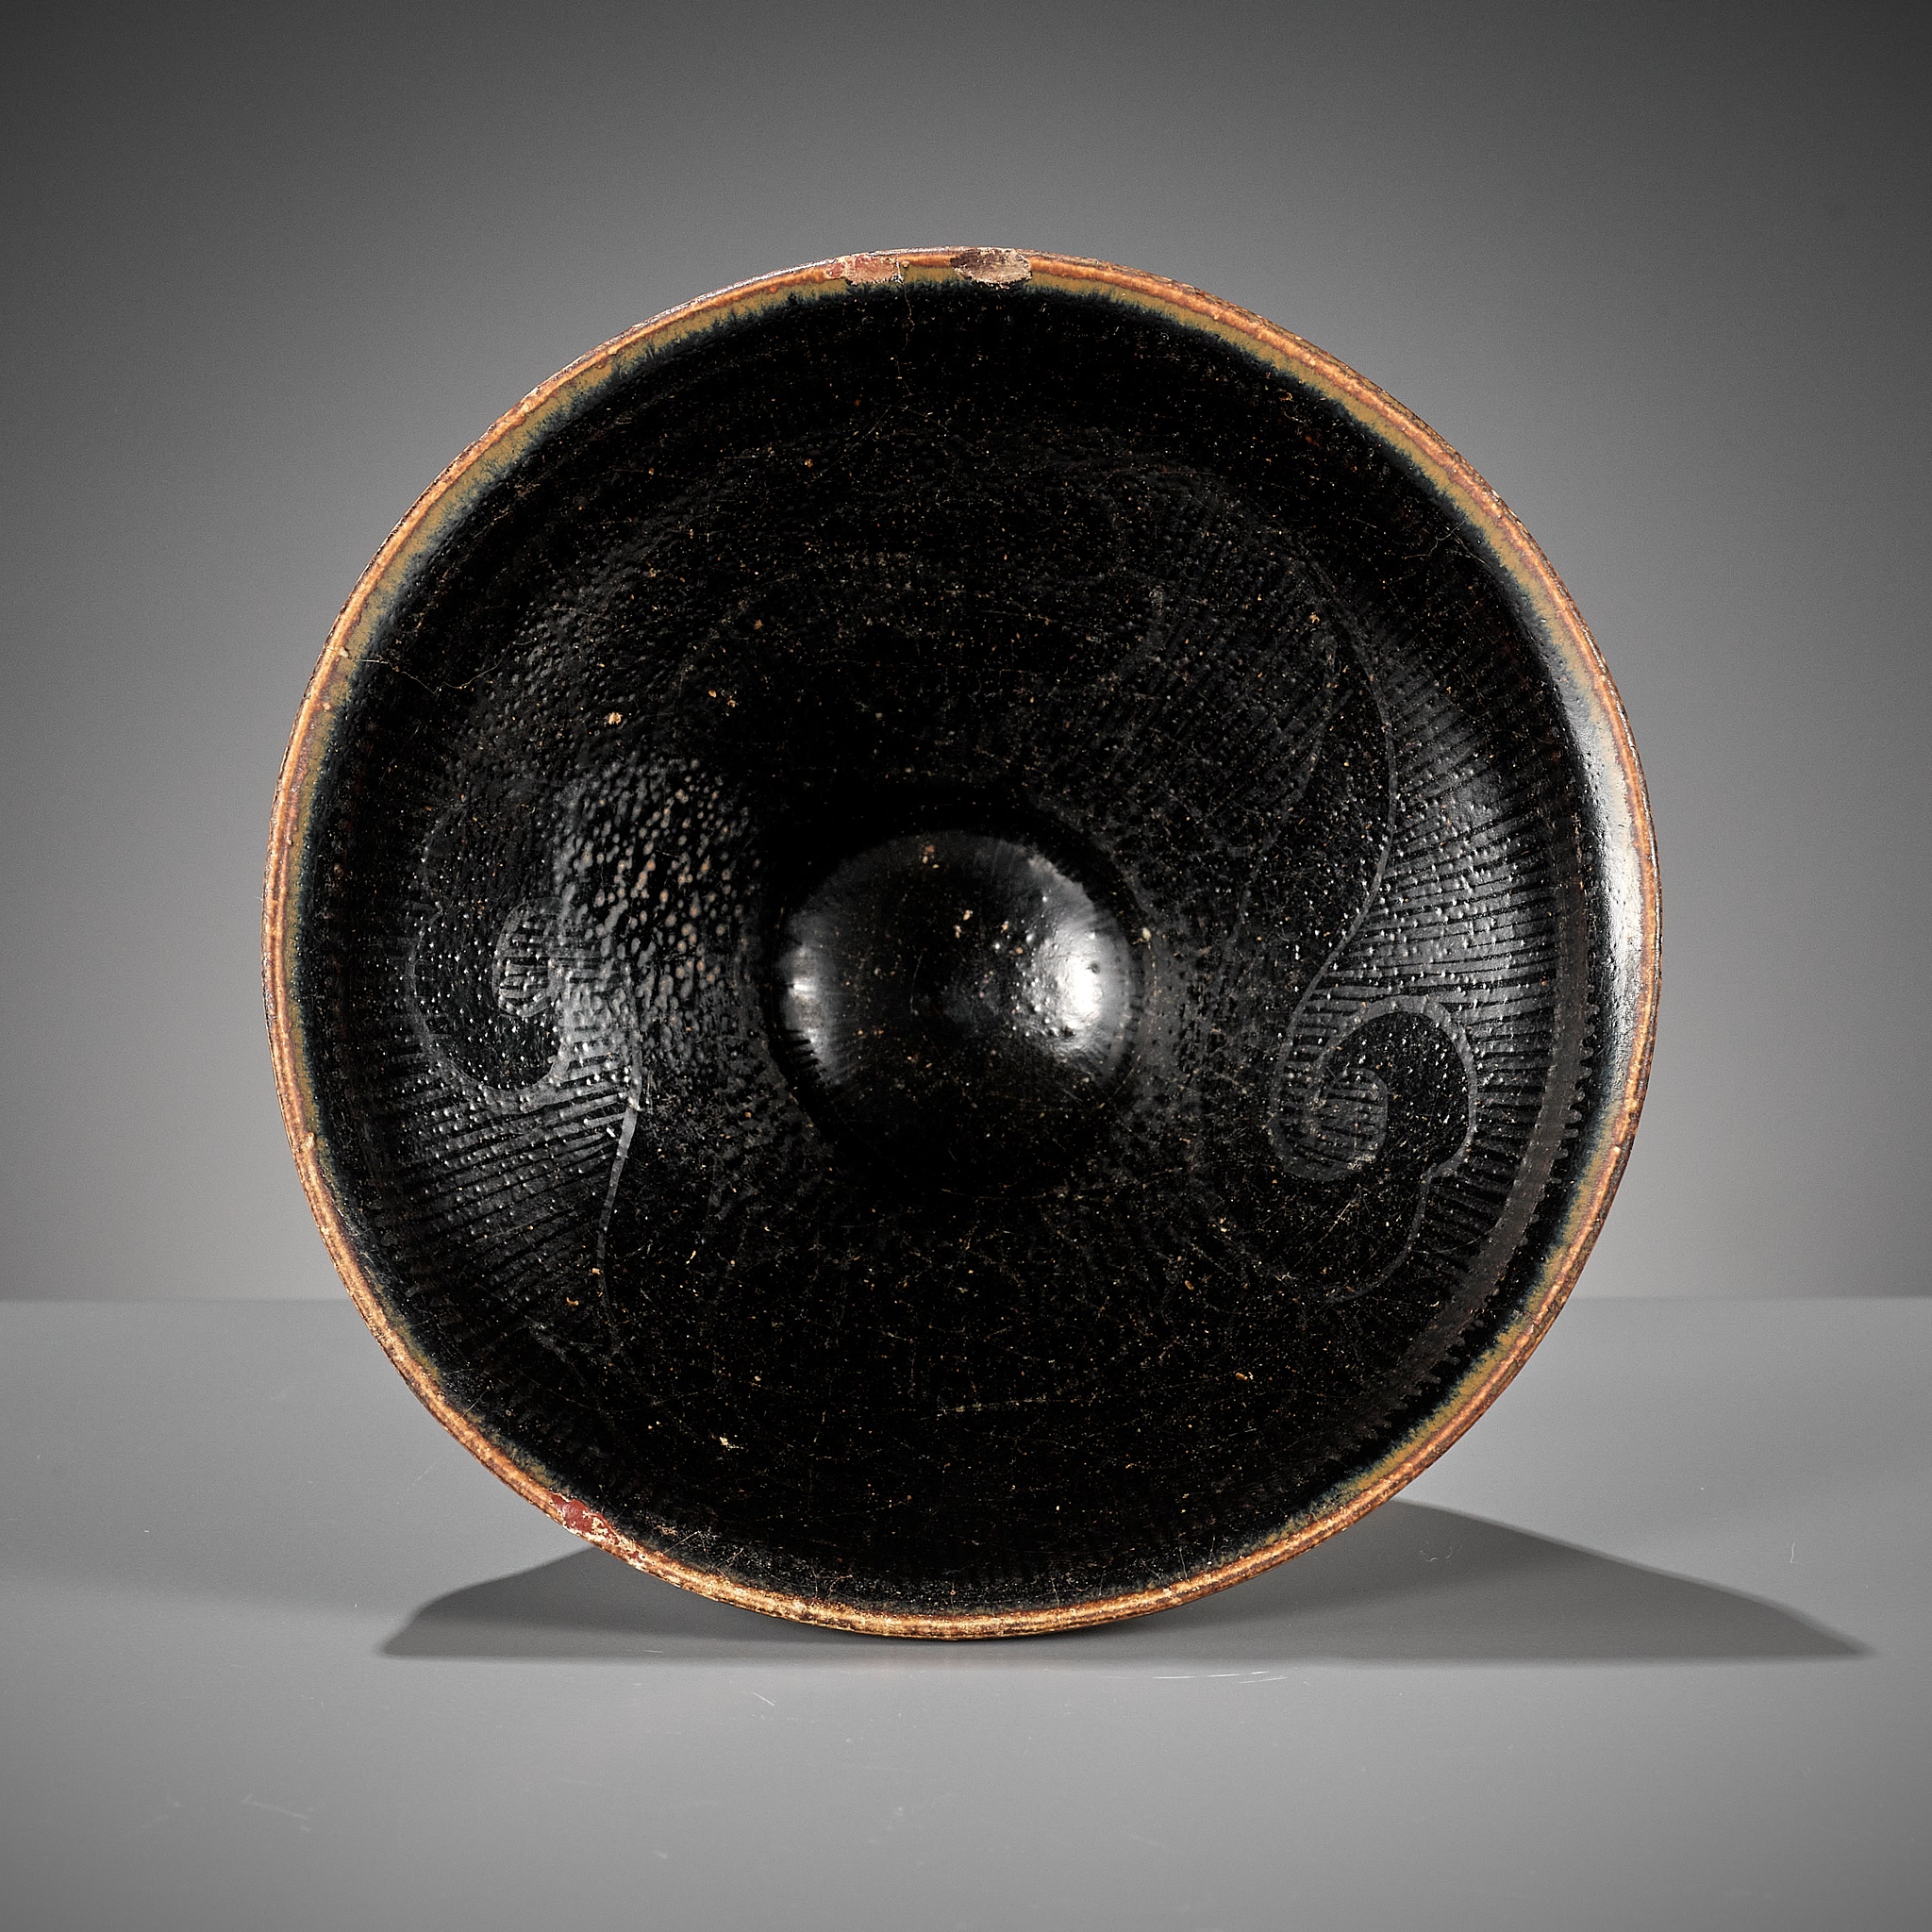 A CIZHOU SILVER-DECORATED AND BLACK-GLAZED TEA BOWL, SOUTHERN SONG OR JIN DYNASTY